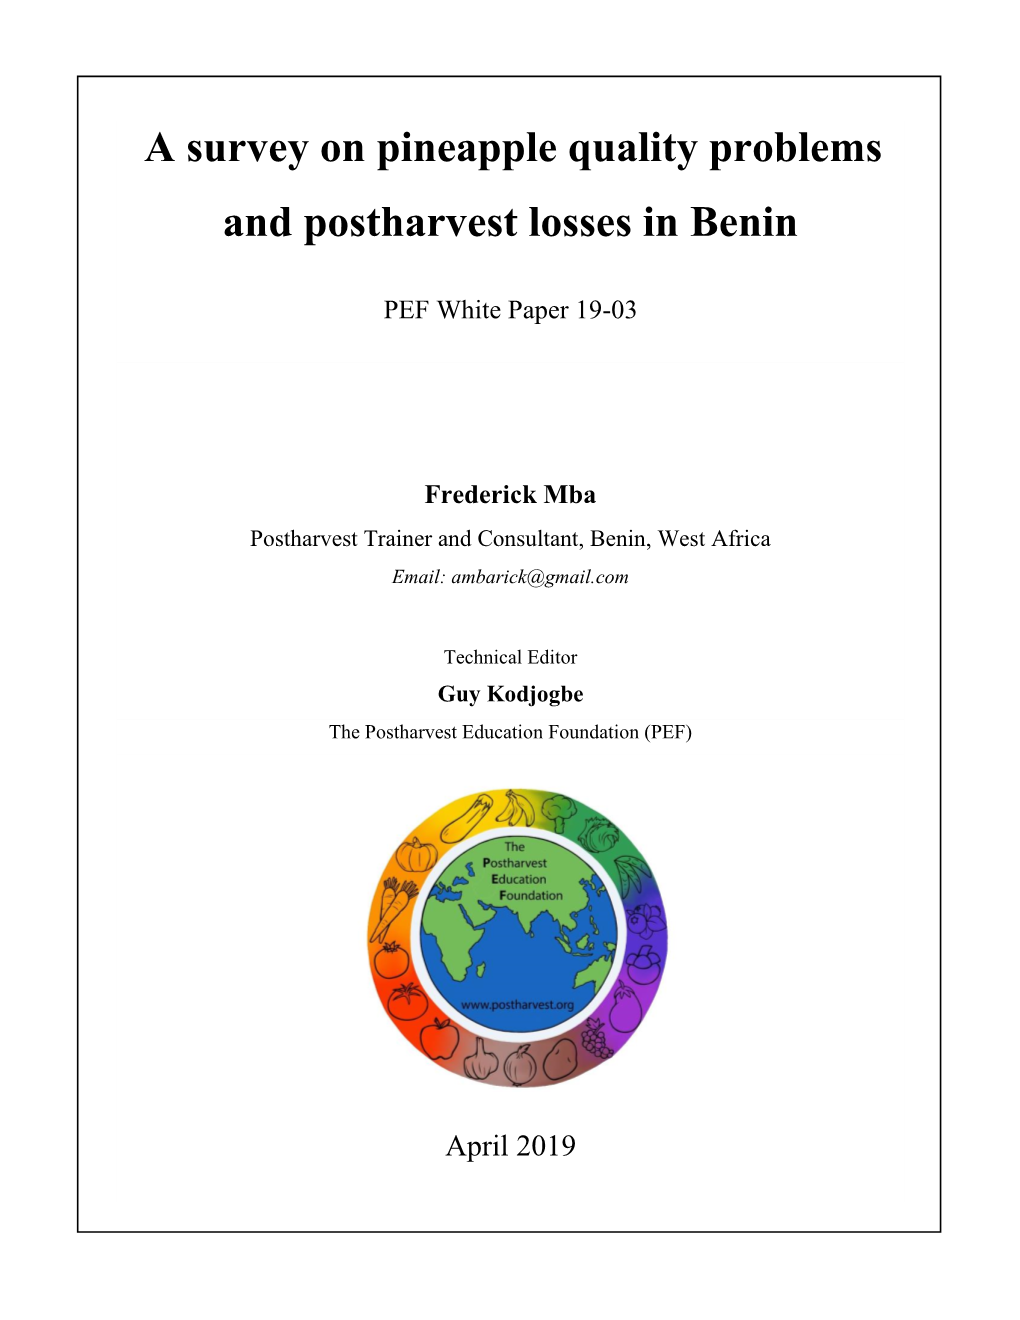 A Survey on Pineapple Quality Problems and Postharvest Losses in Benin